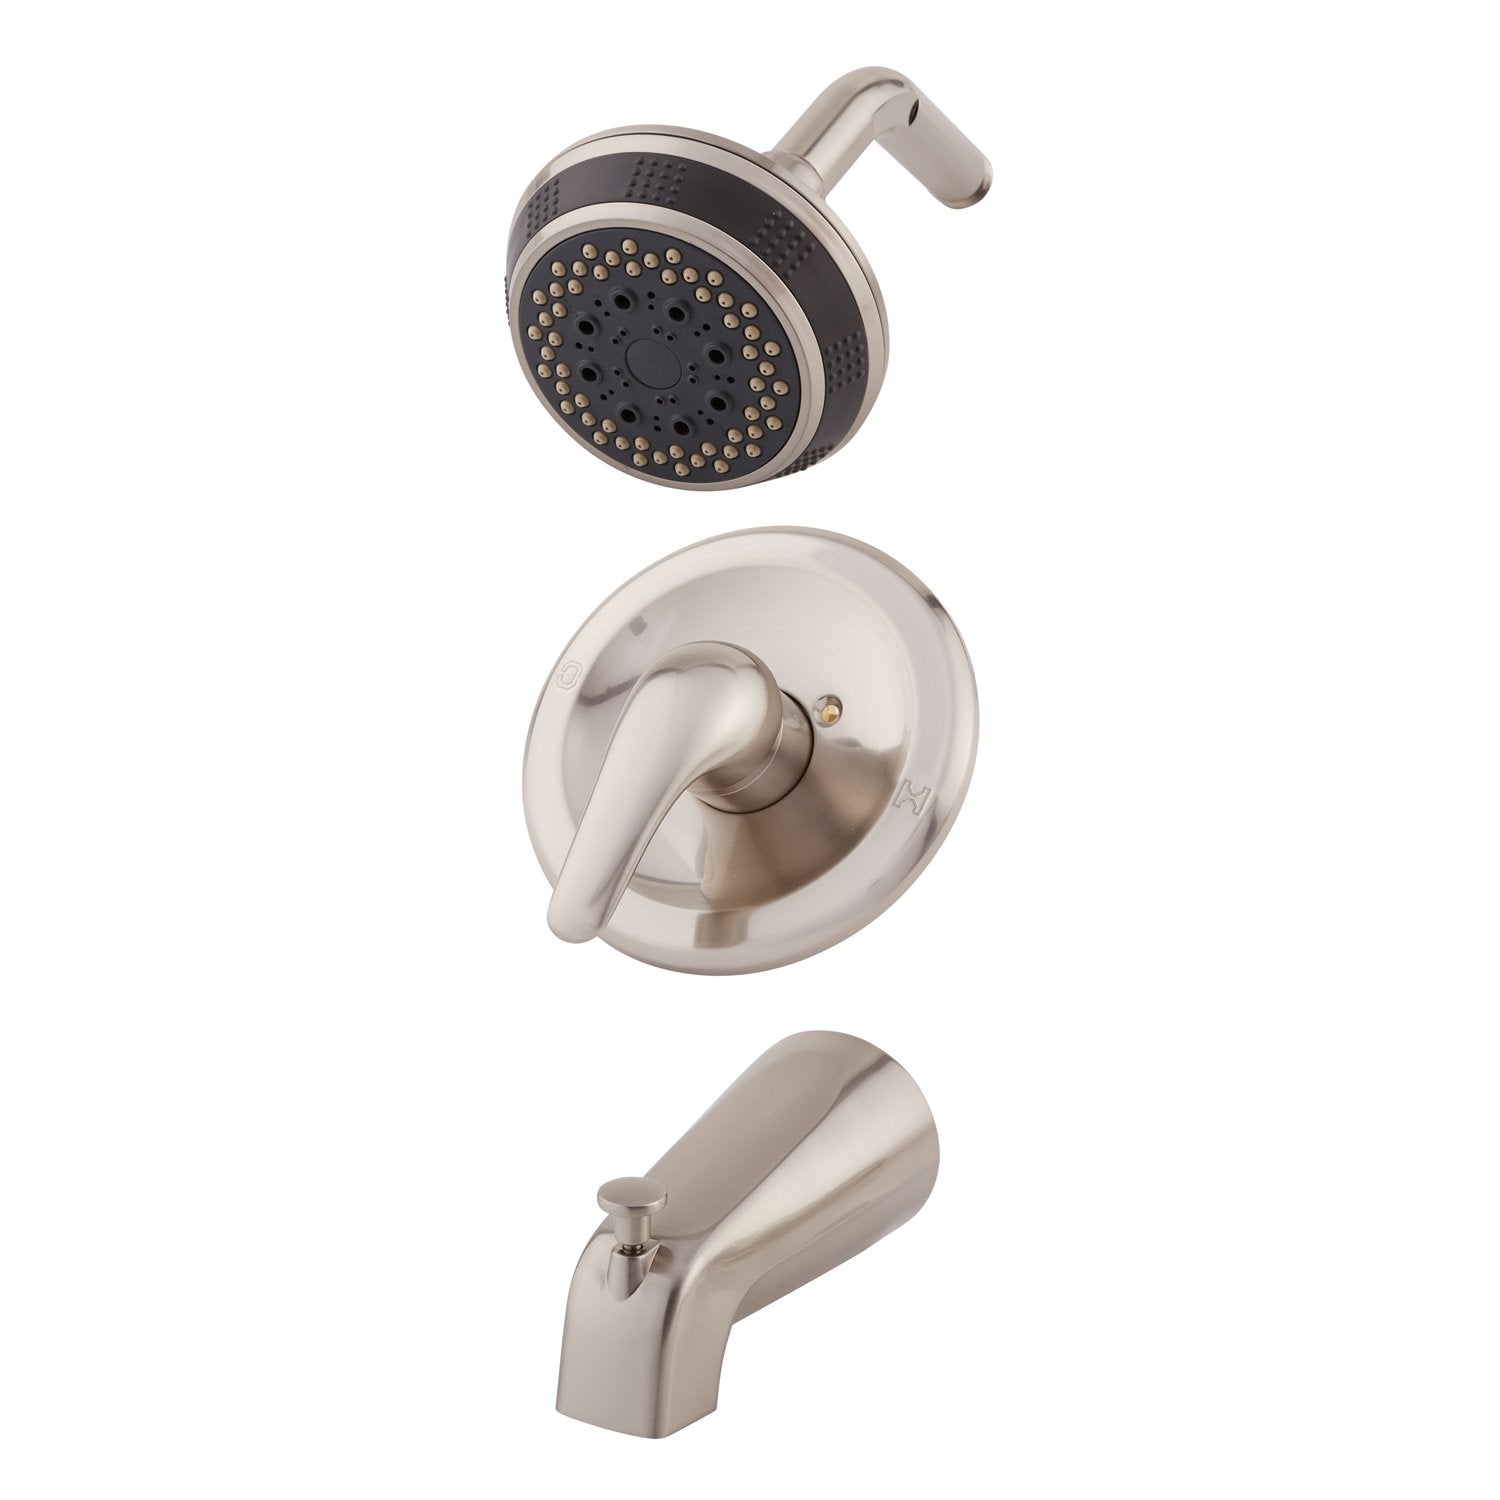 DAX Shower System, Faucet Set, with Shower and Tub Trim, Wall Mount, Brass Body, Brushed Nickel Finish (DAX-0511-BN)